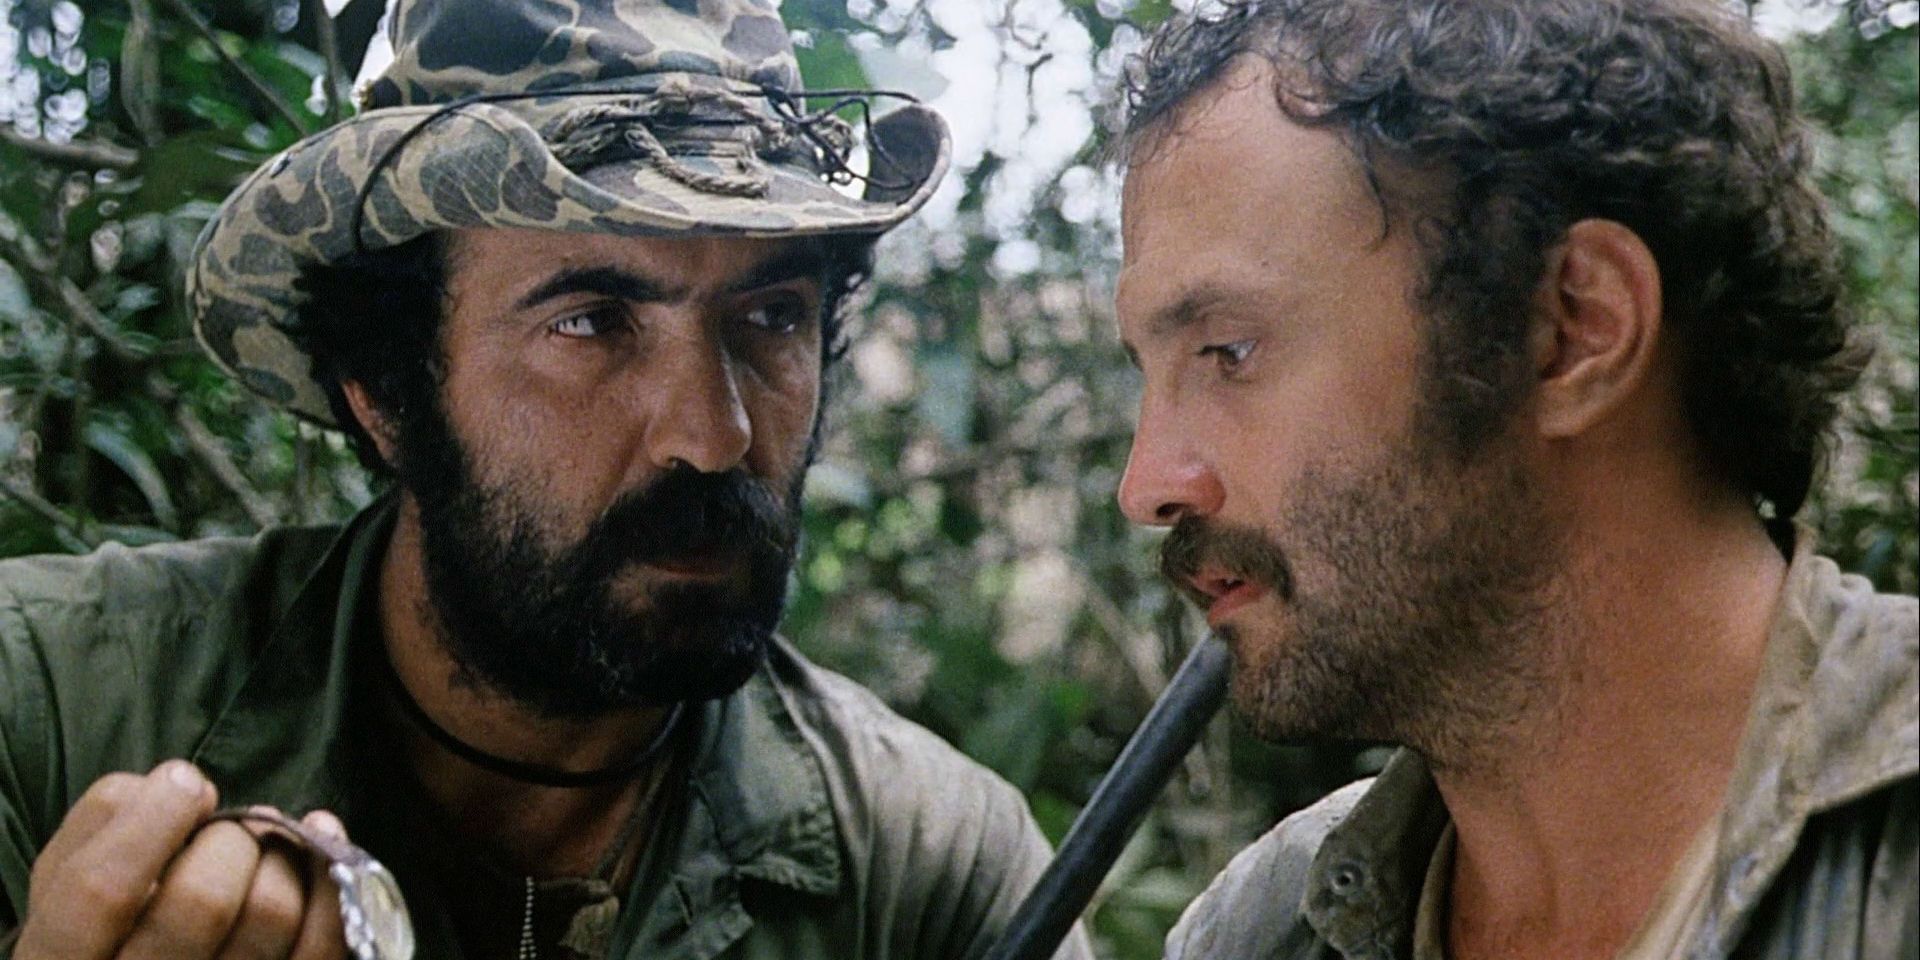 Cannibal holocaust two characters and a watch